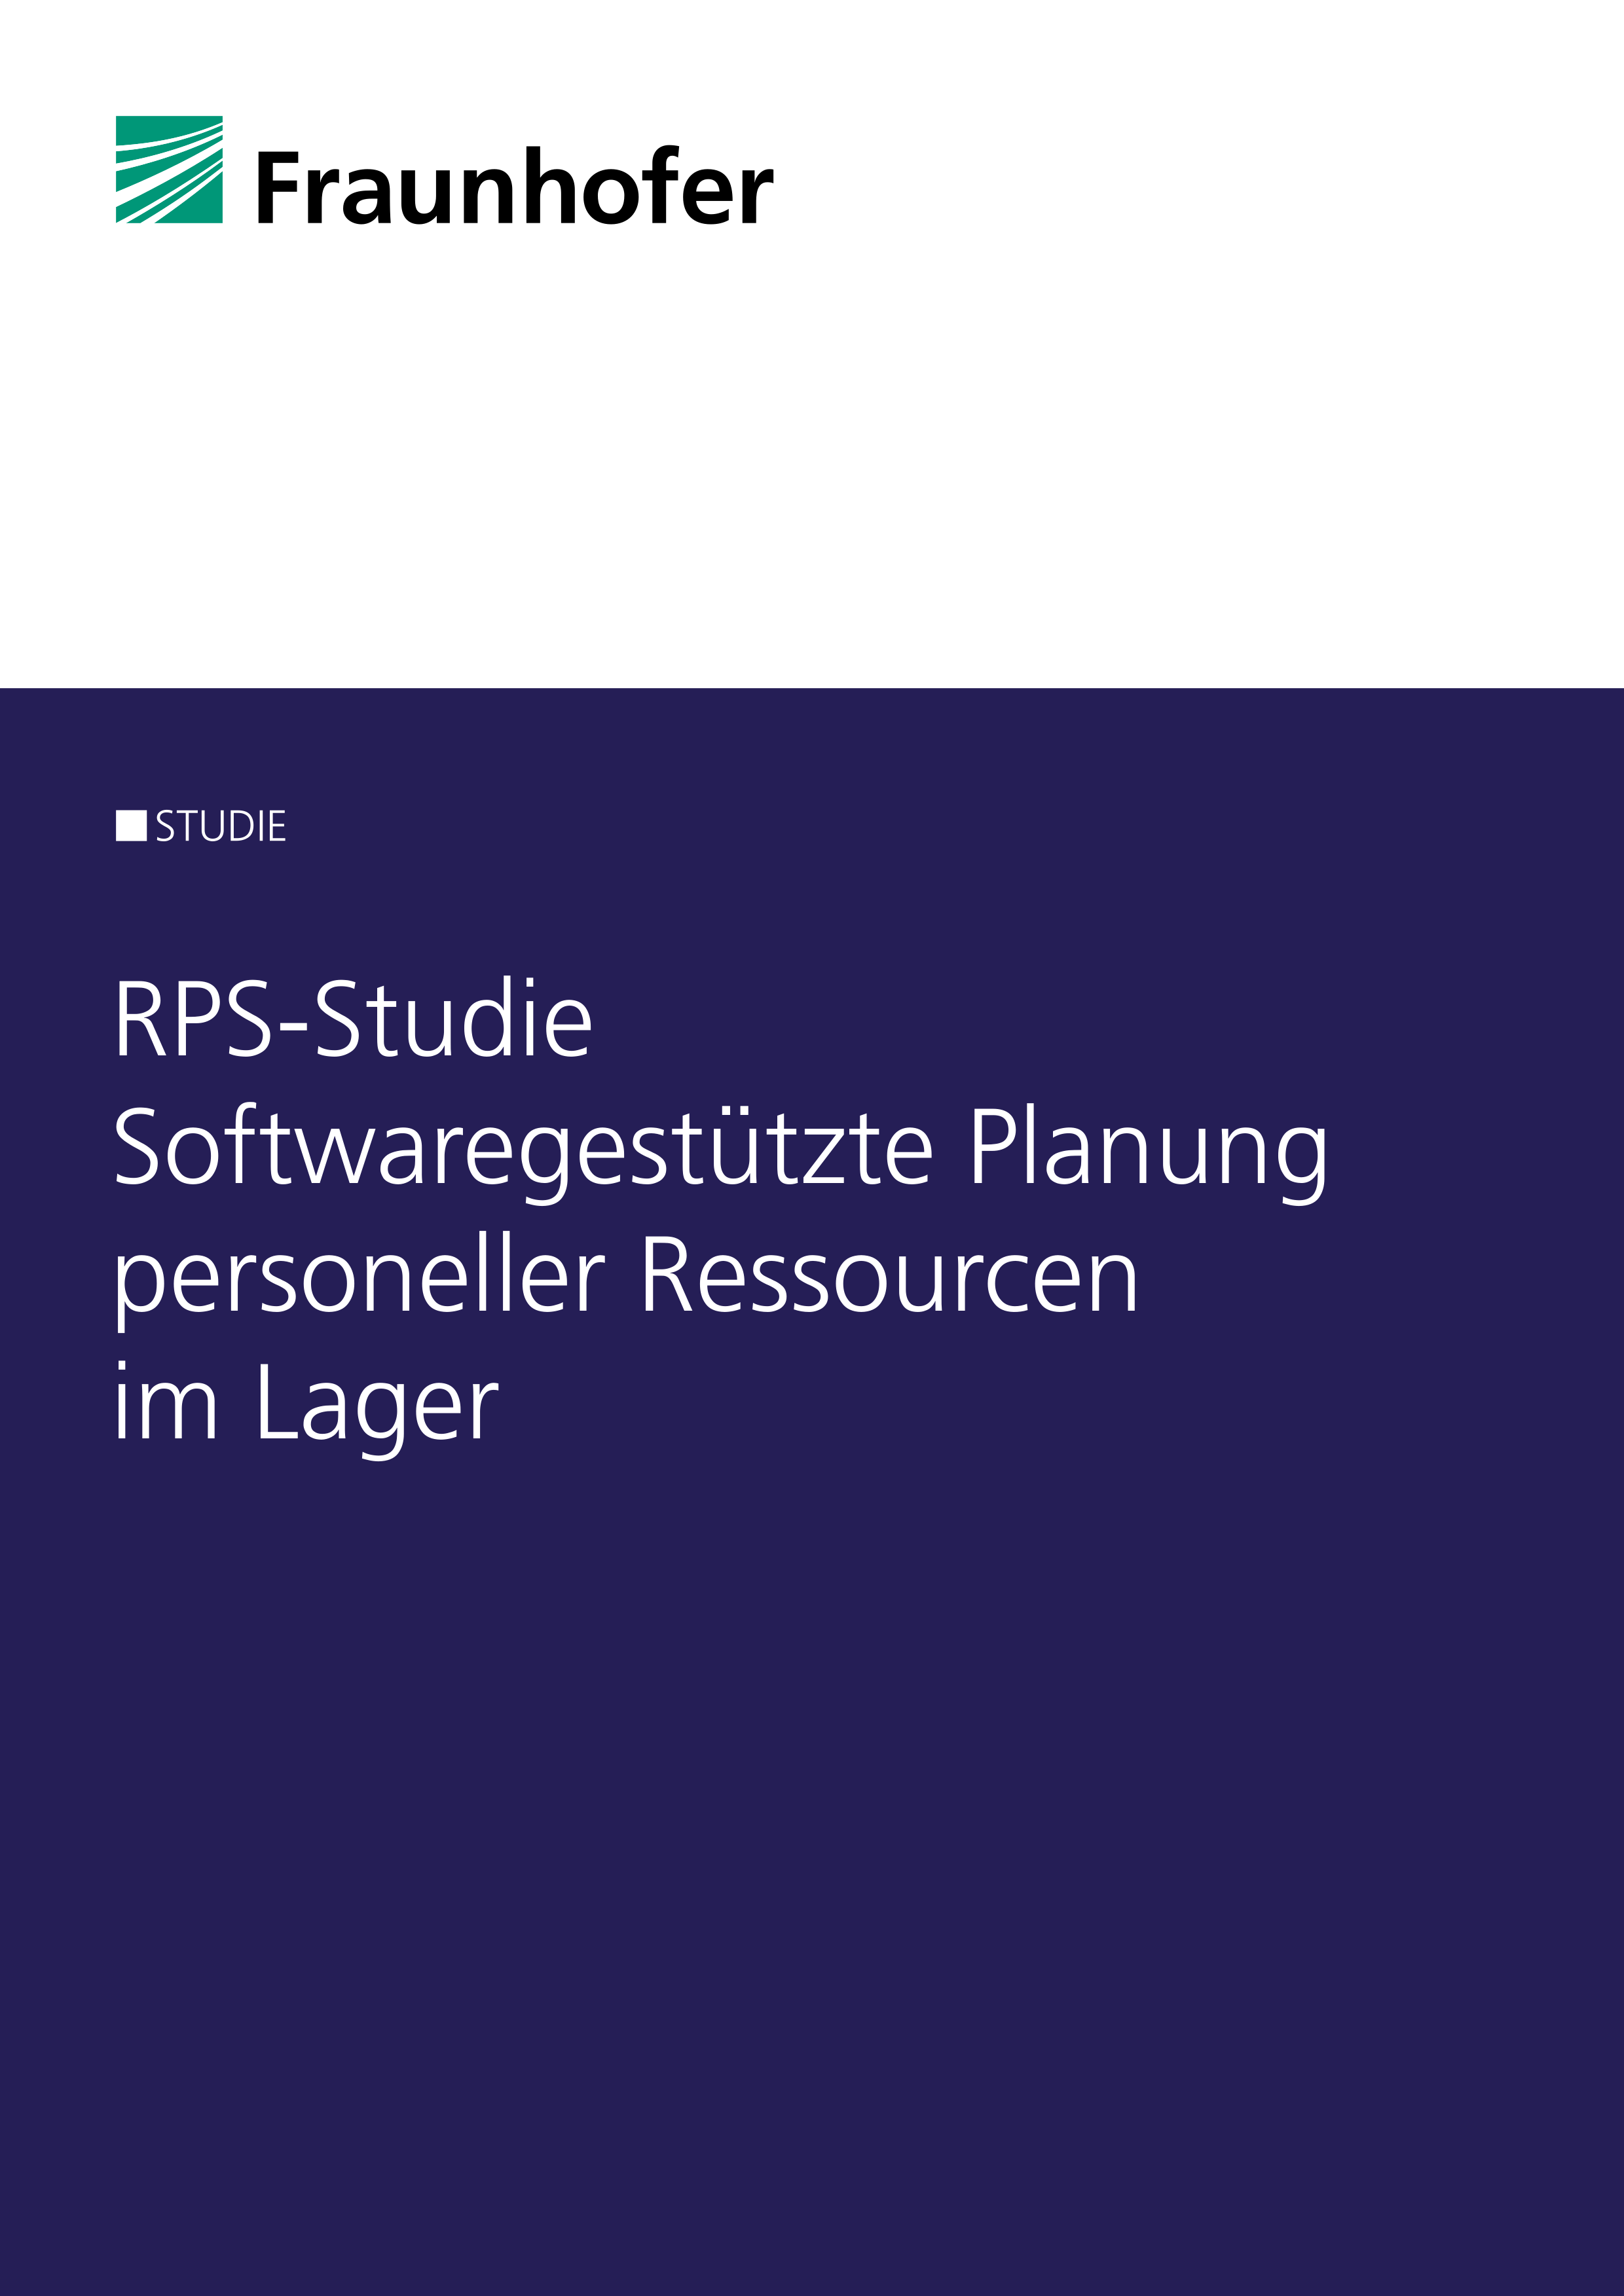 RPS study Software-supported planning of personnel resources in the warehouse